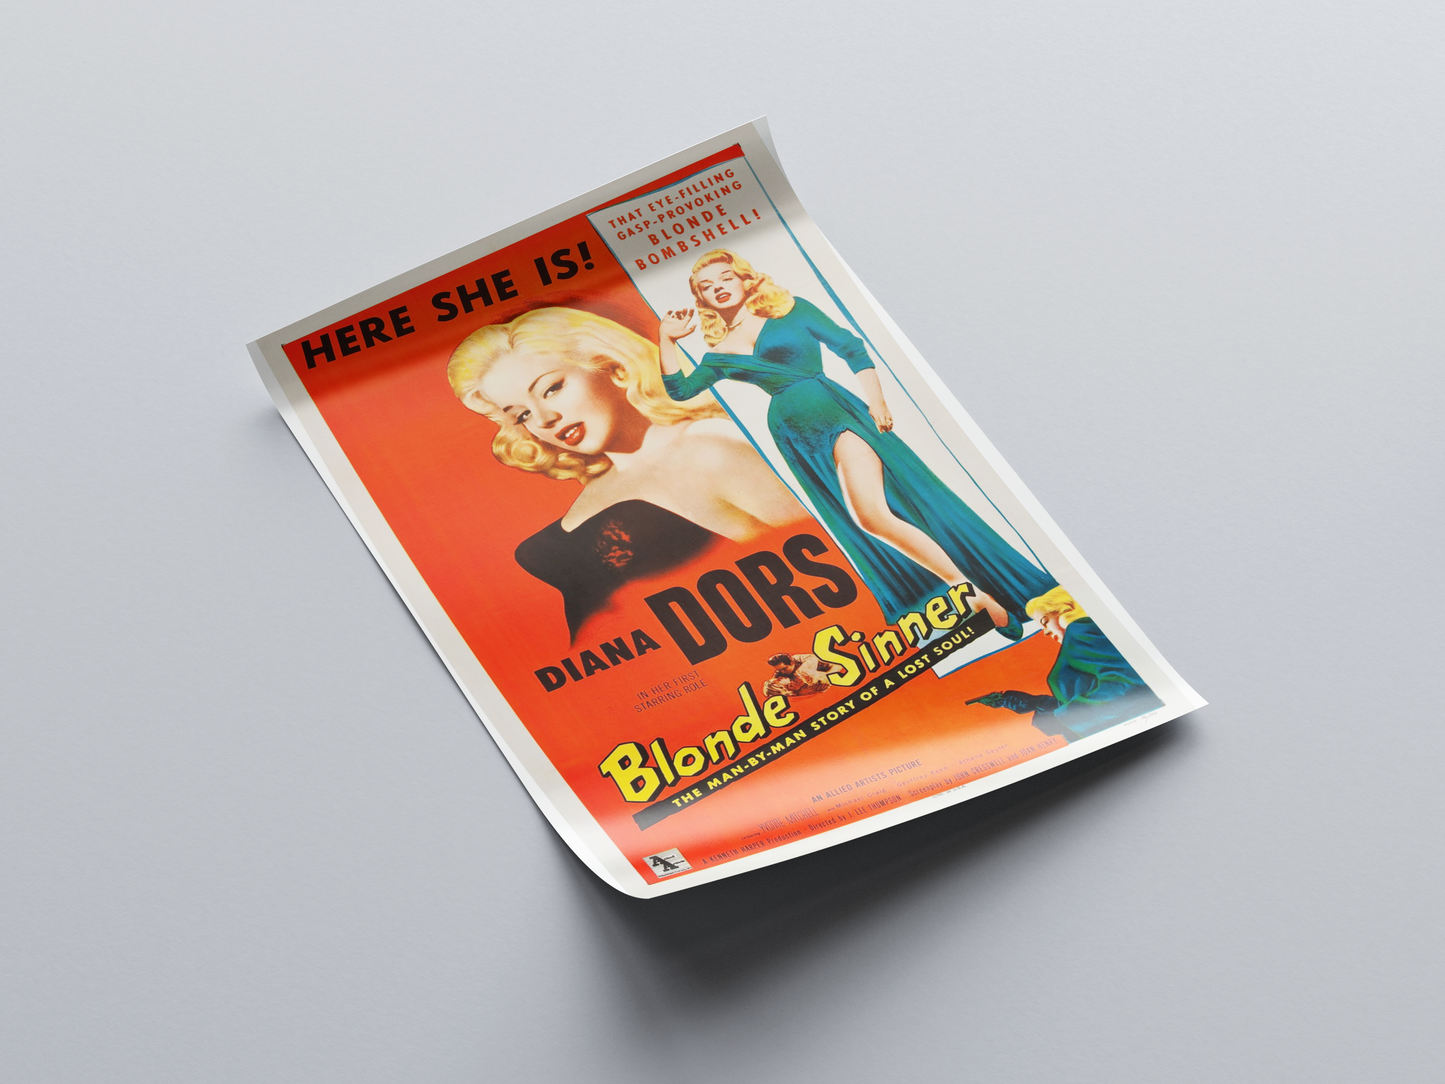 Yield to the Night / Blonde Sinner (1956) Movie Poster displayed in interior setting